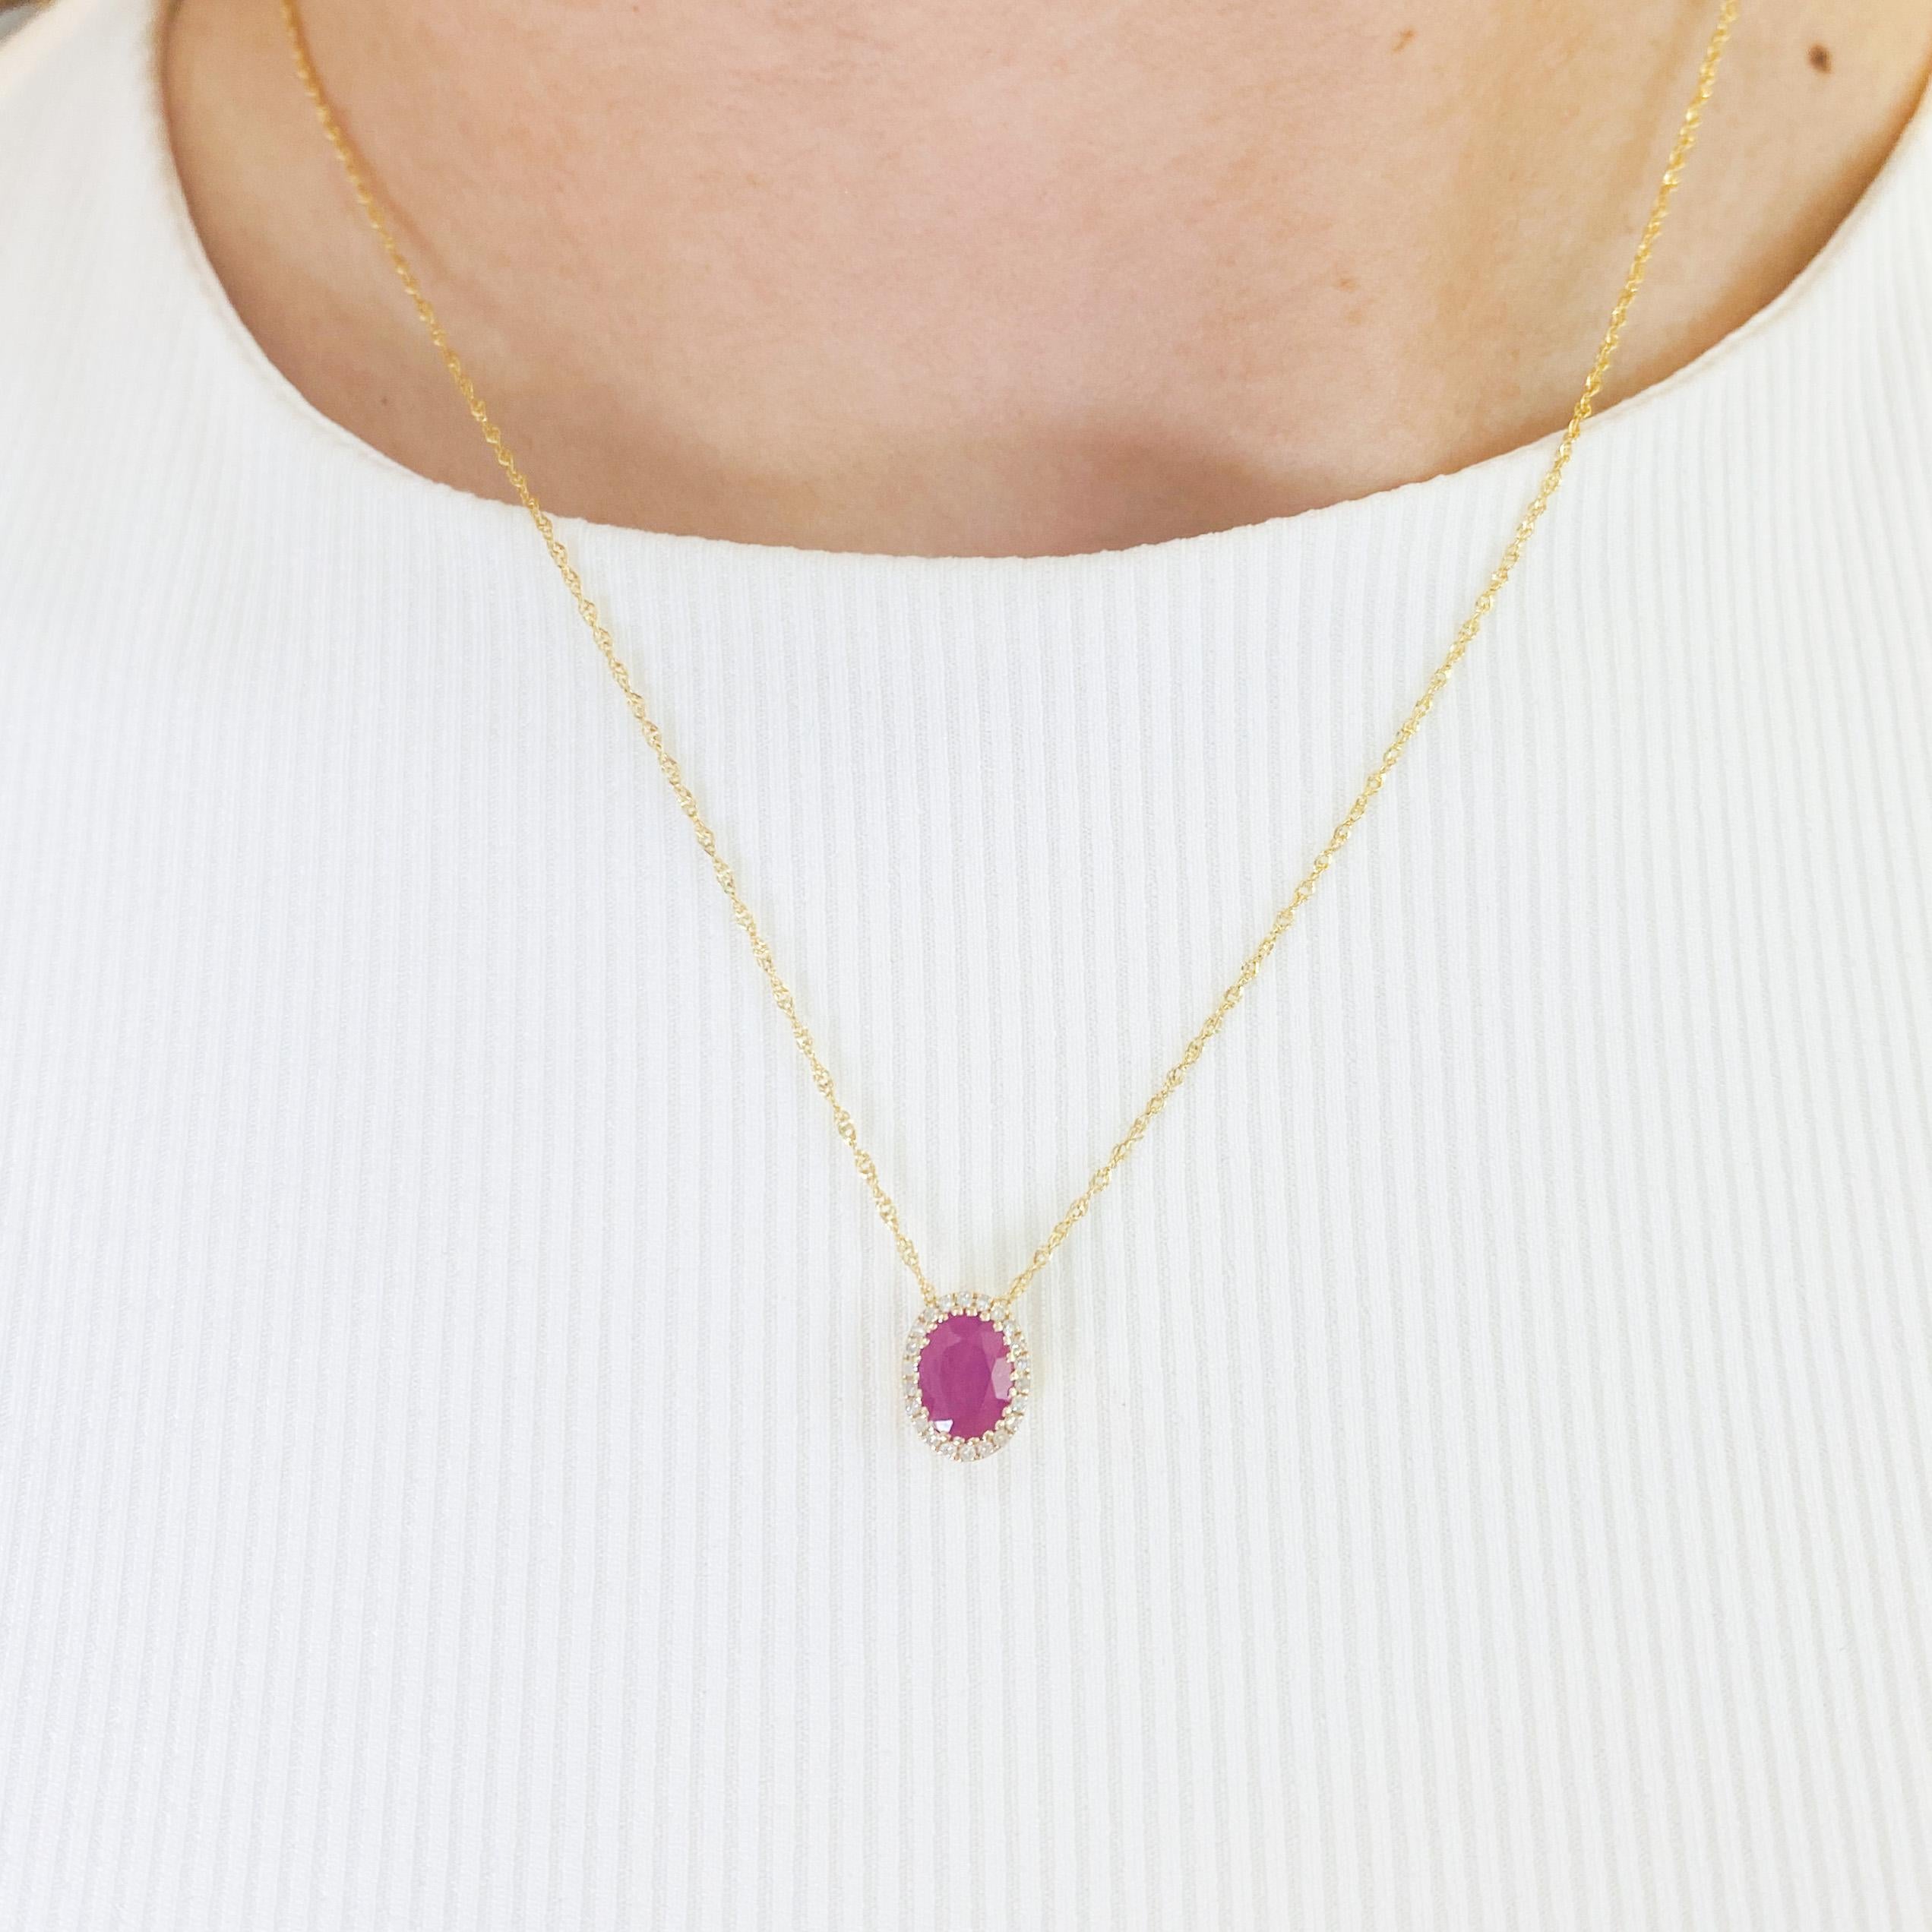 Celebrate a July loved one with this ruby necklace. This could make a perfect birthday, or graduation, or anniversary gift, push present, or to honor an important milestone... the perfect necklace for any July celebration. This sleek ruby and